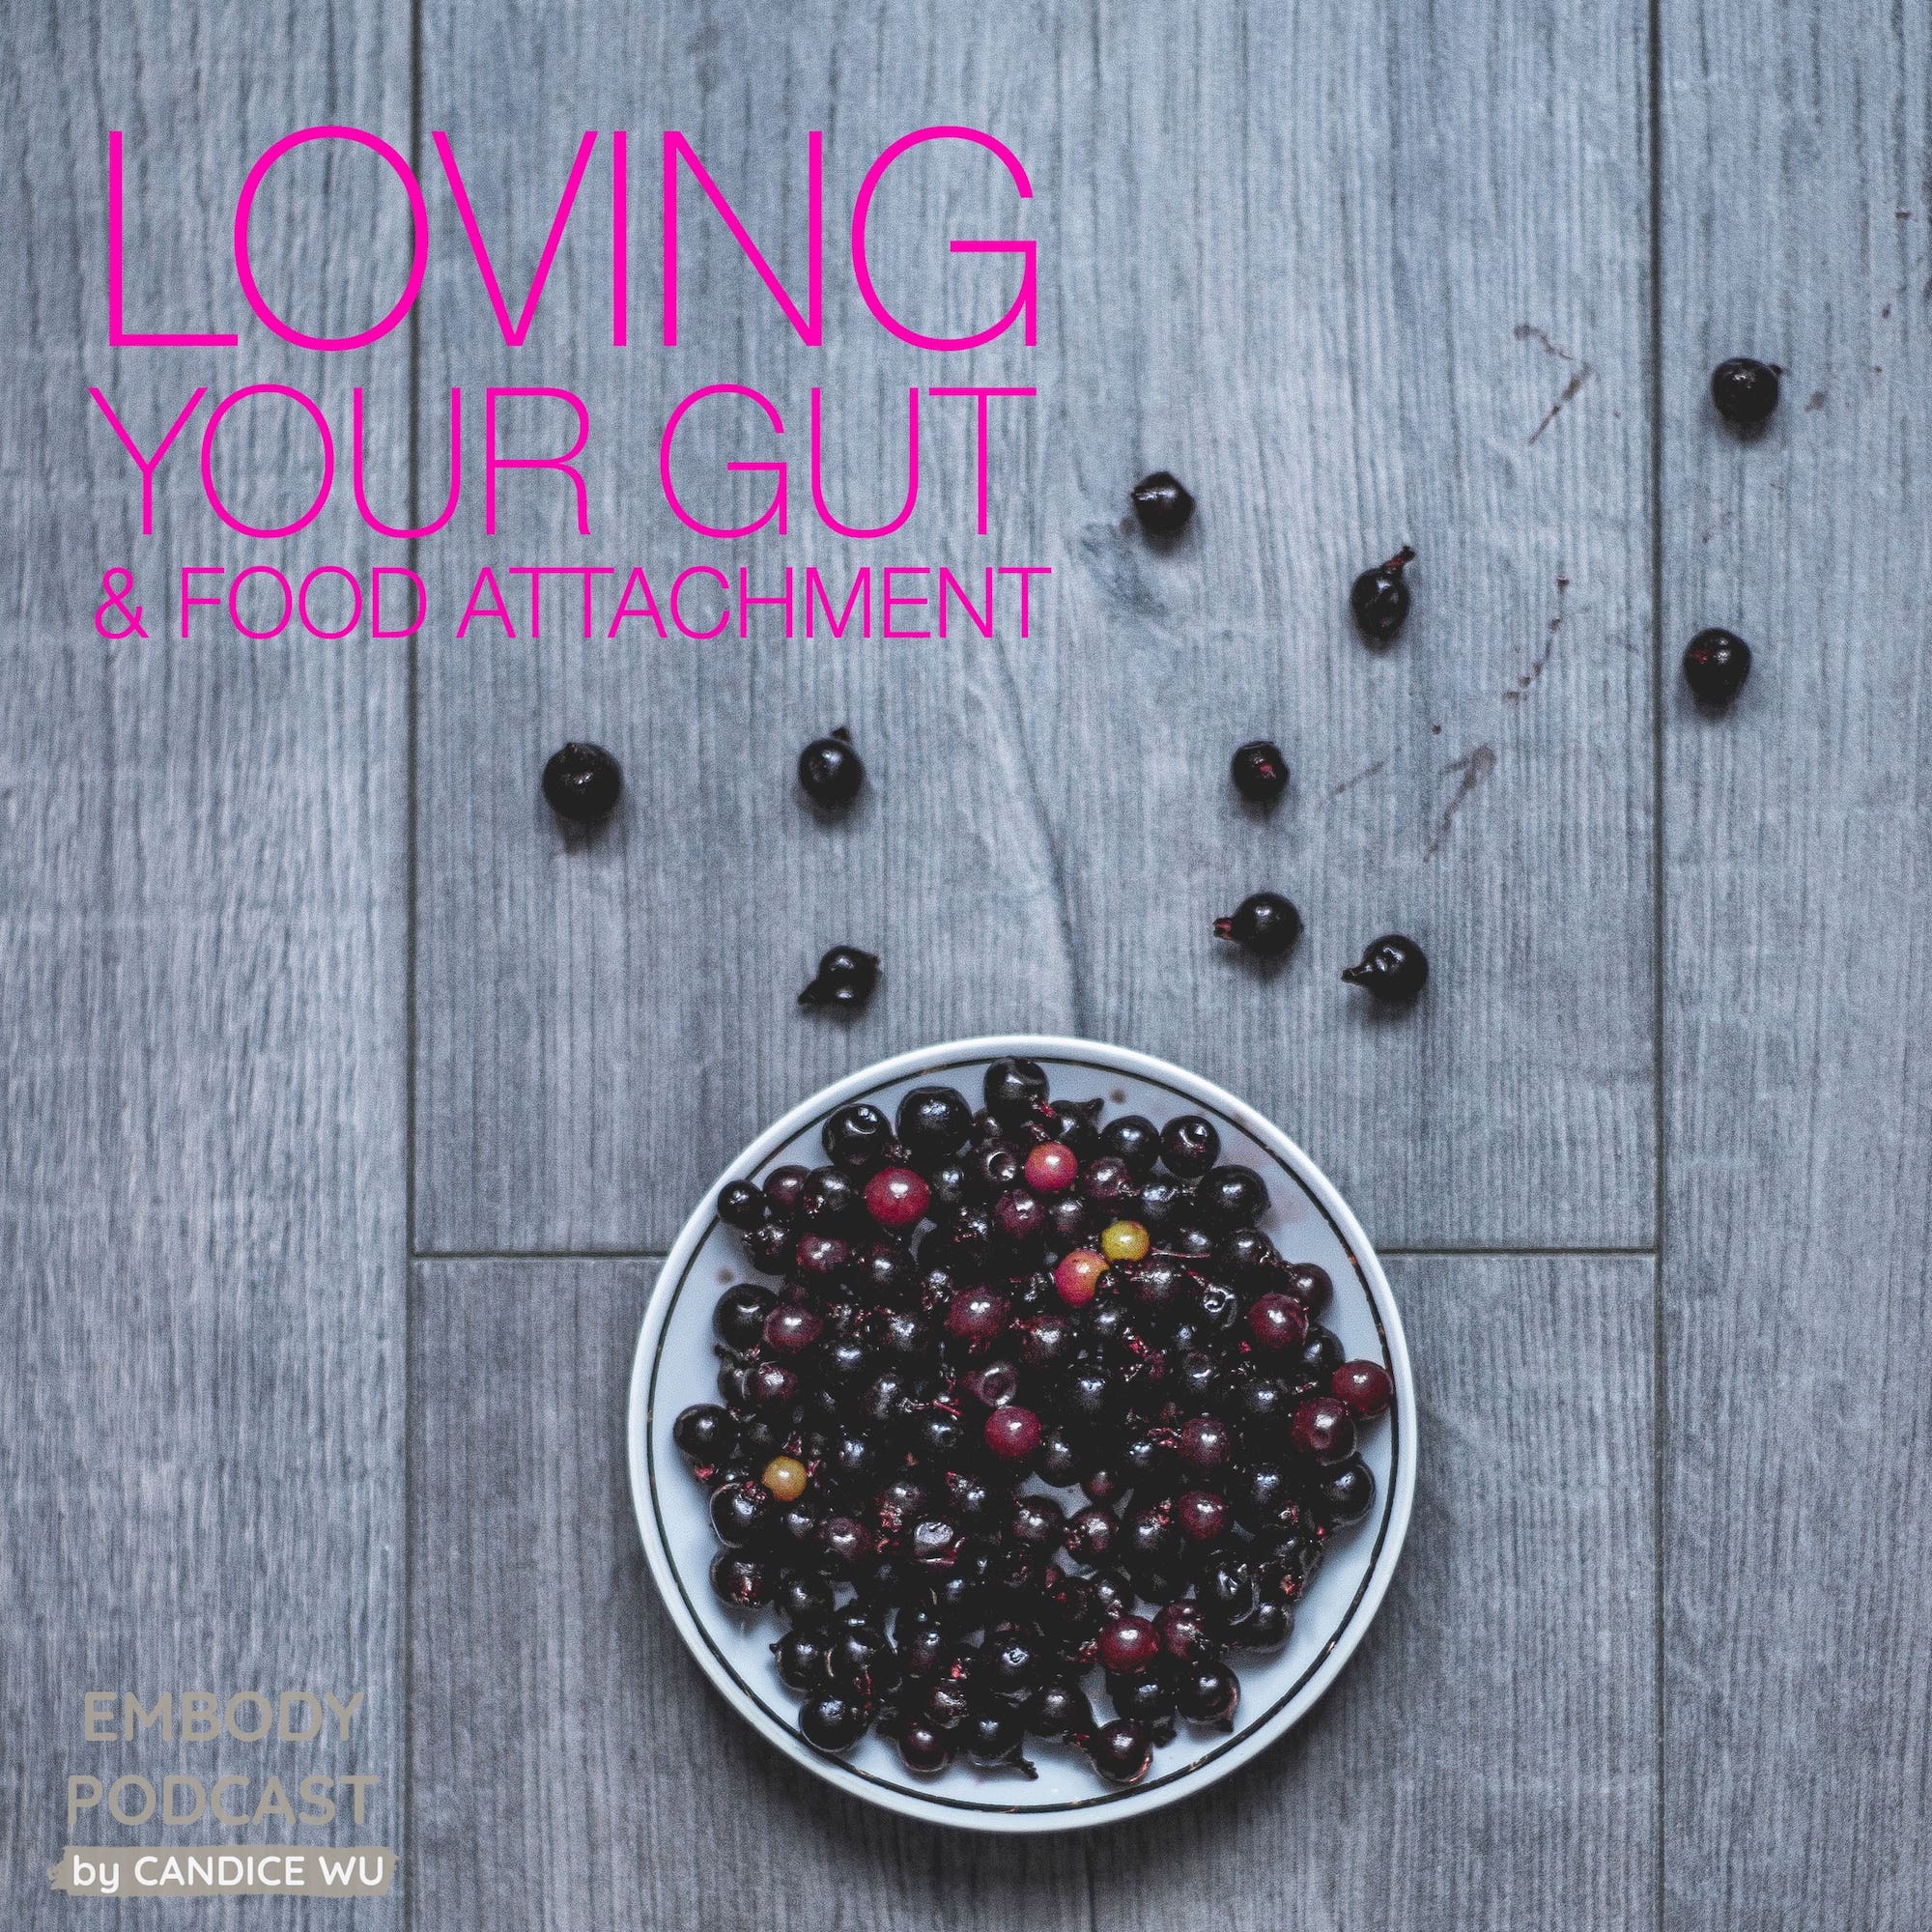 26: Loving Your Gut & Food Attachment